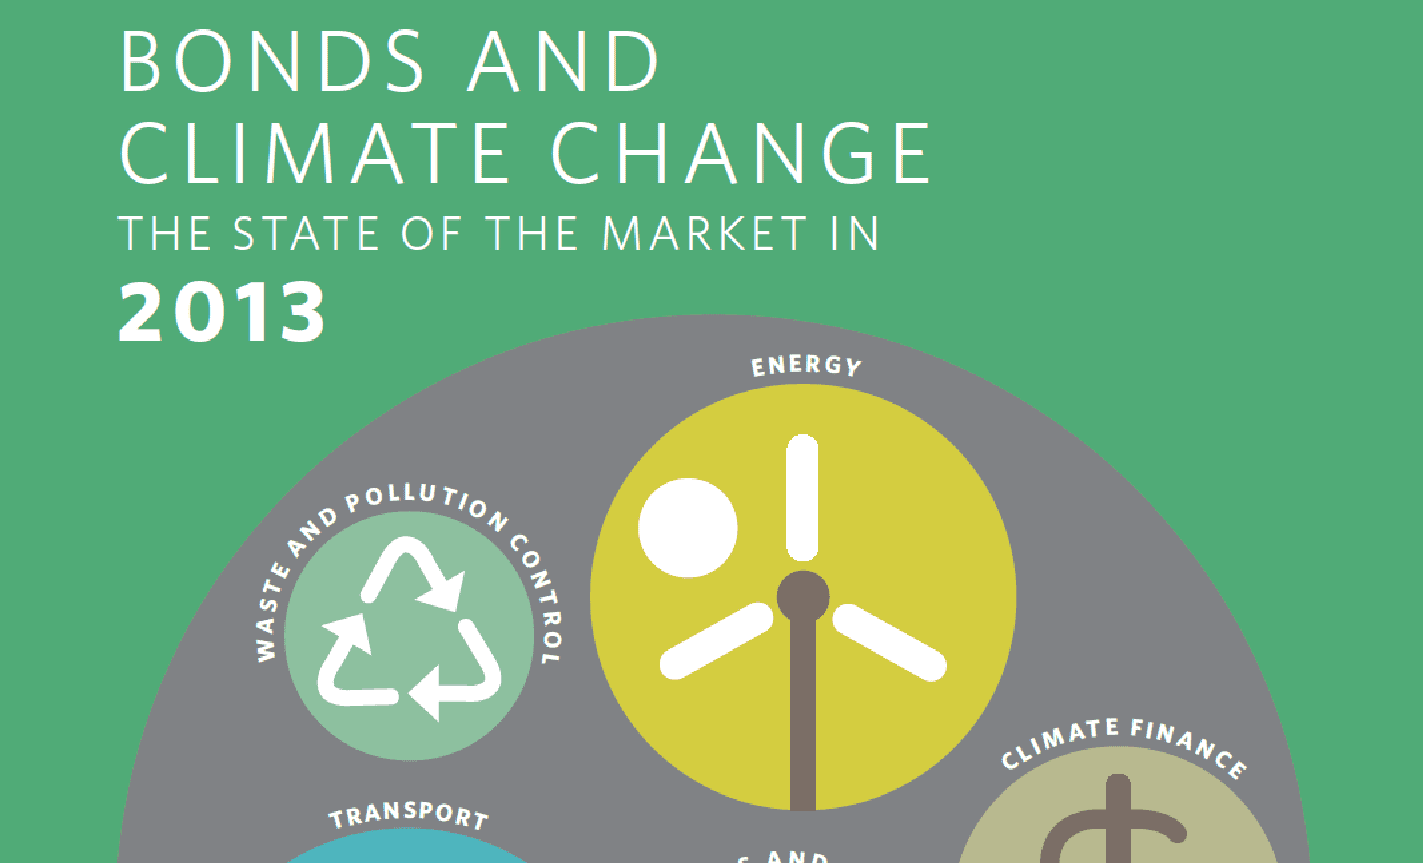 “Bonds and Climate Change: The State of the Market in 2013,” HSBC Climate Change Centre of Excellence, Climate Bond Initiative